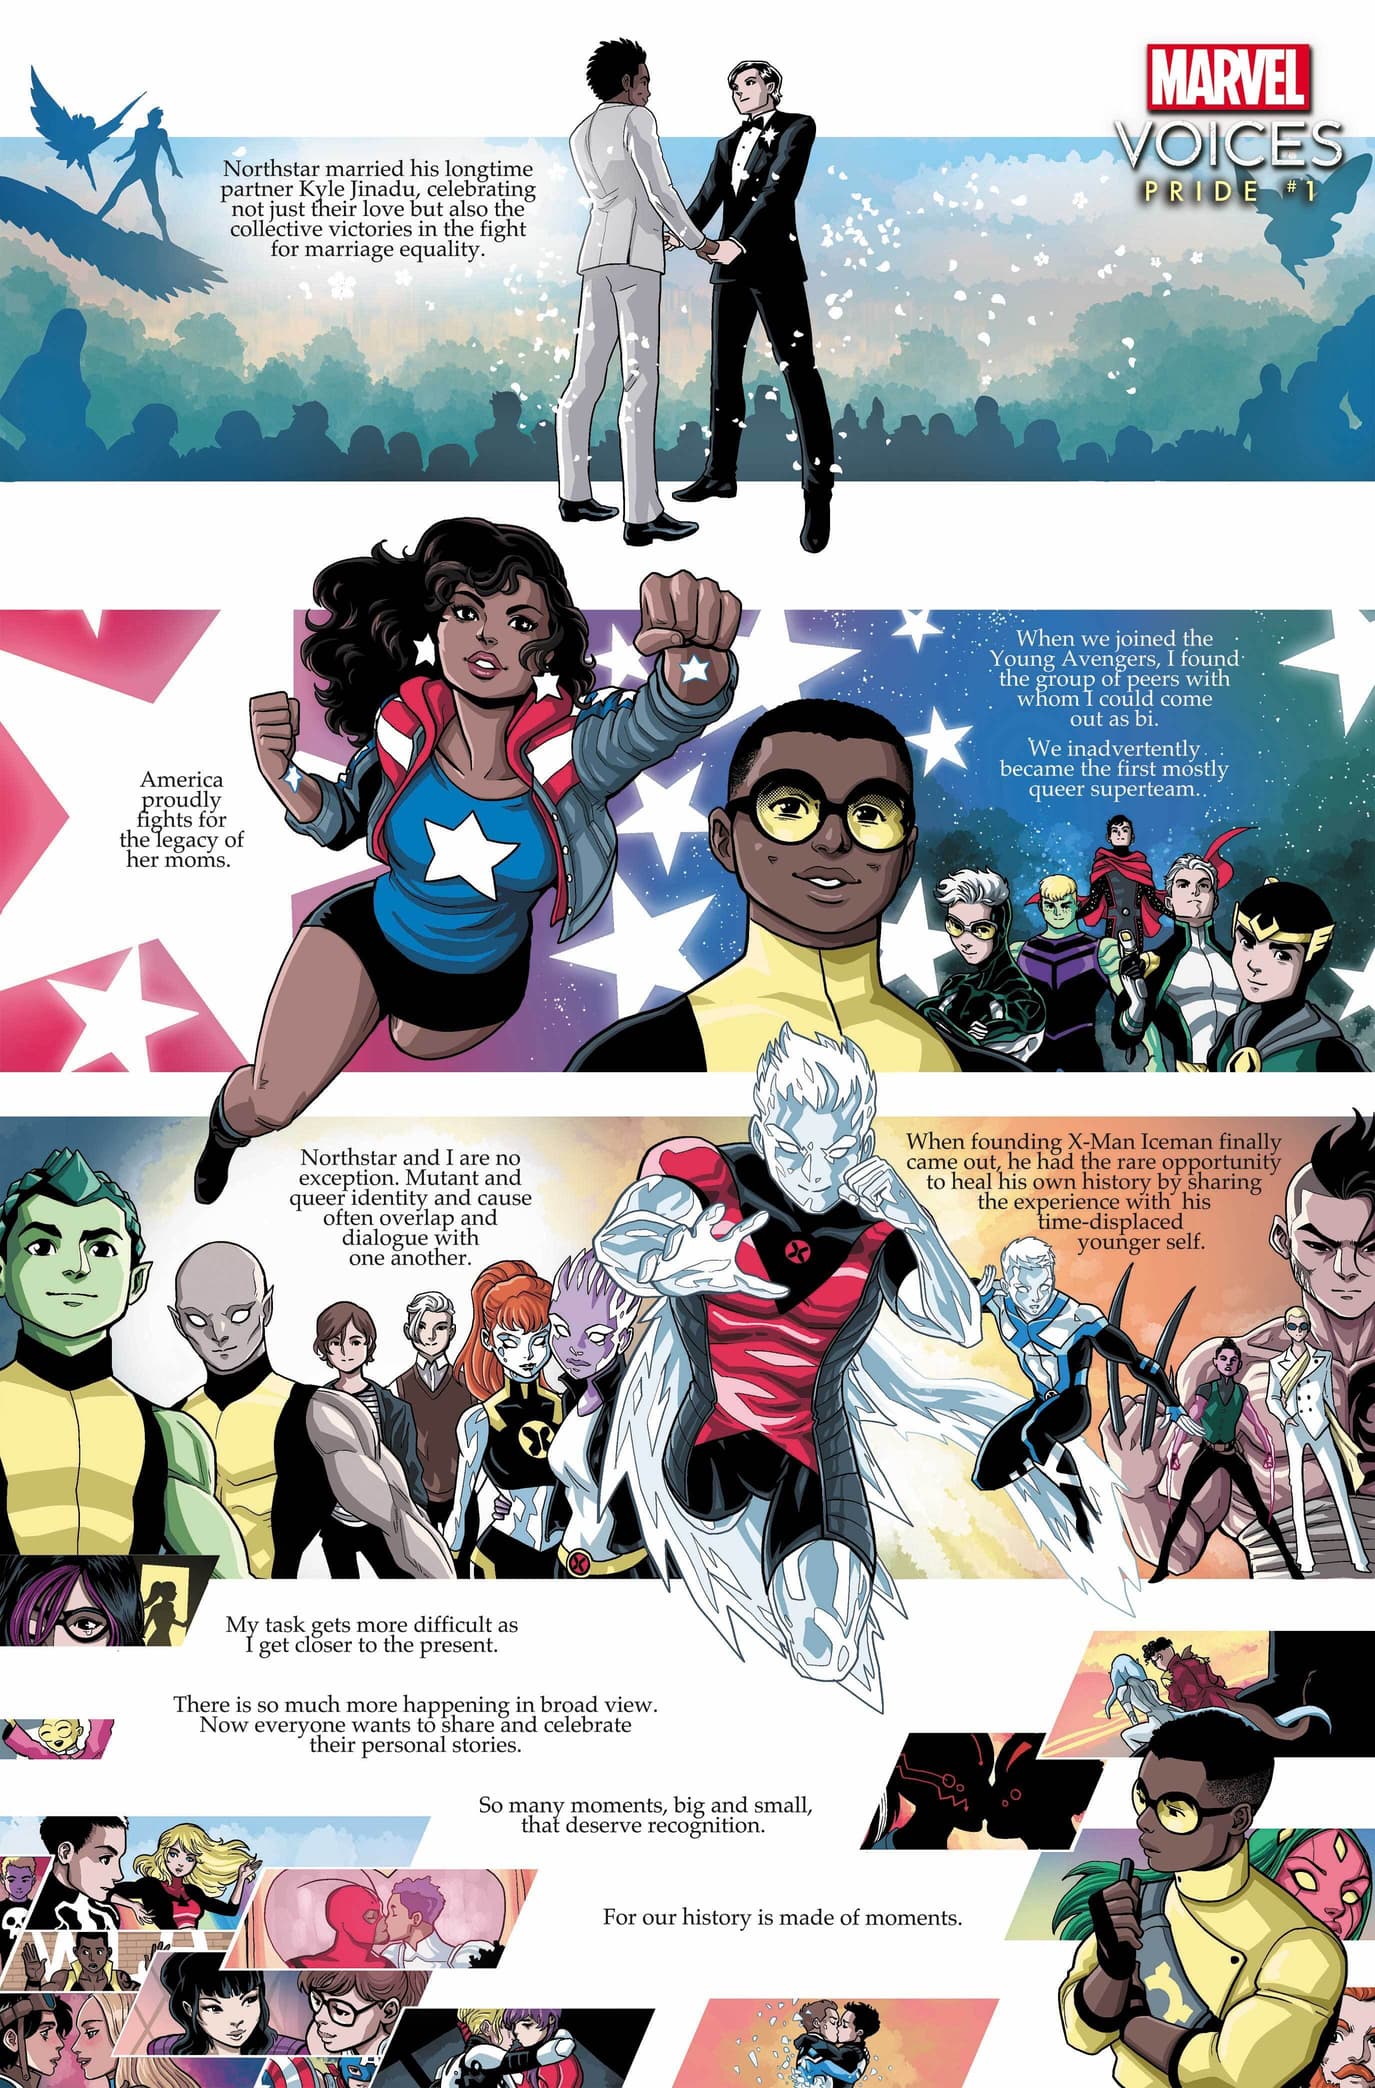 MARVEL’S VOICES: PRIDE #1 introduction by LUCIANO VECCHIO 